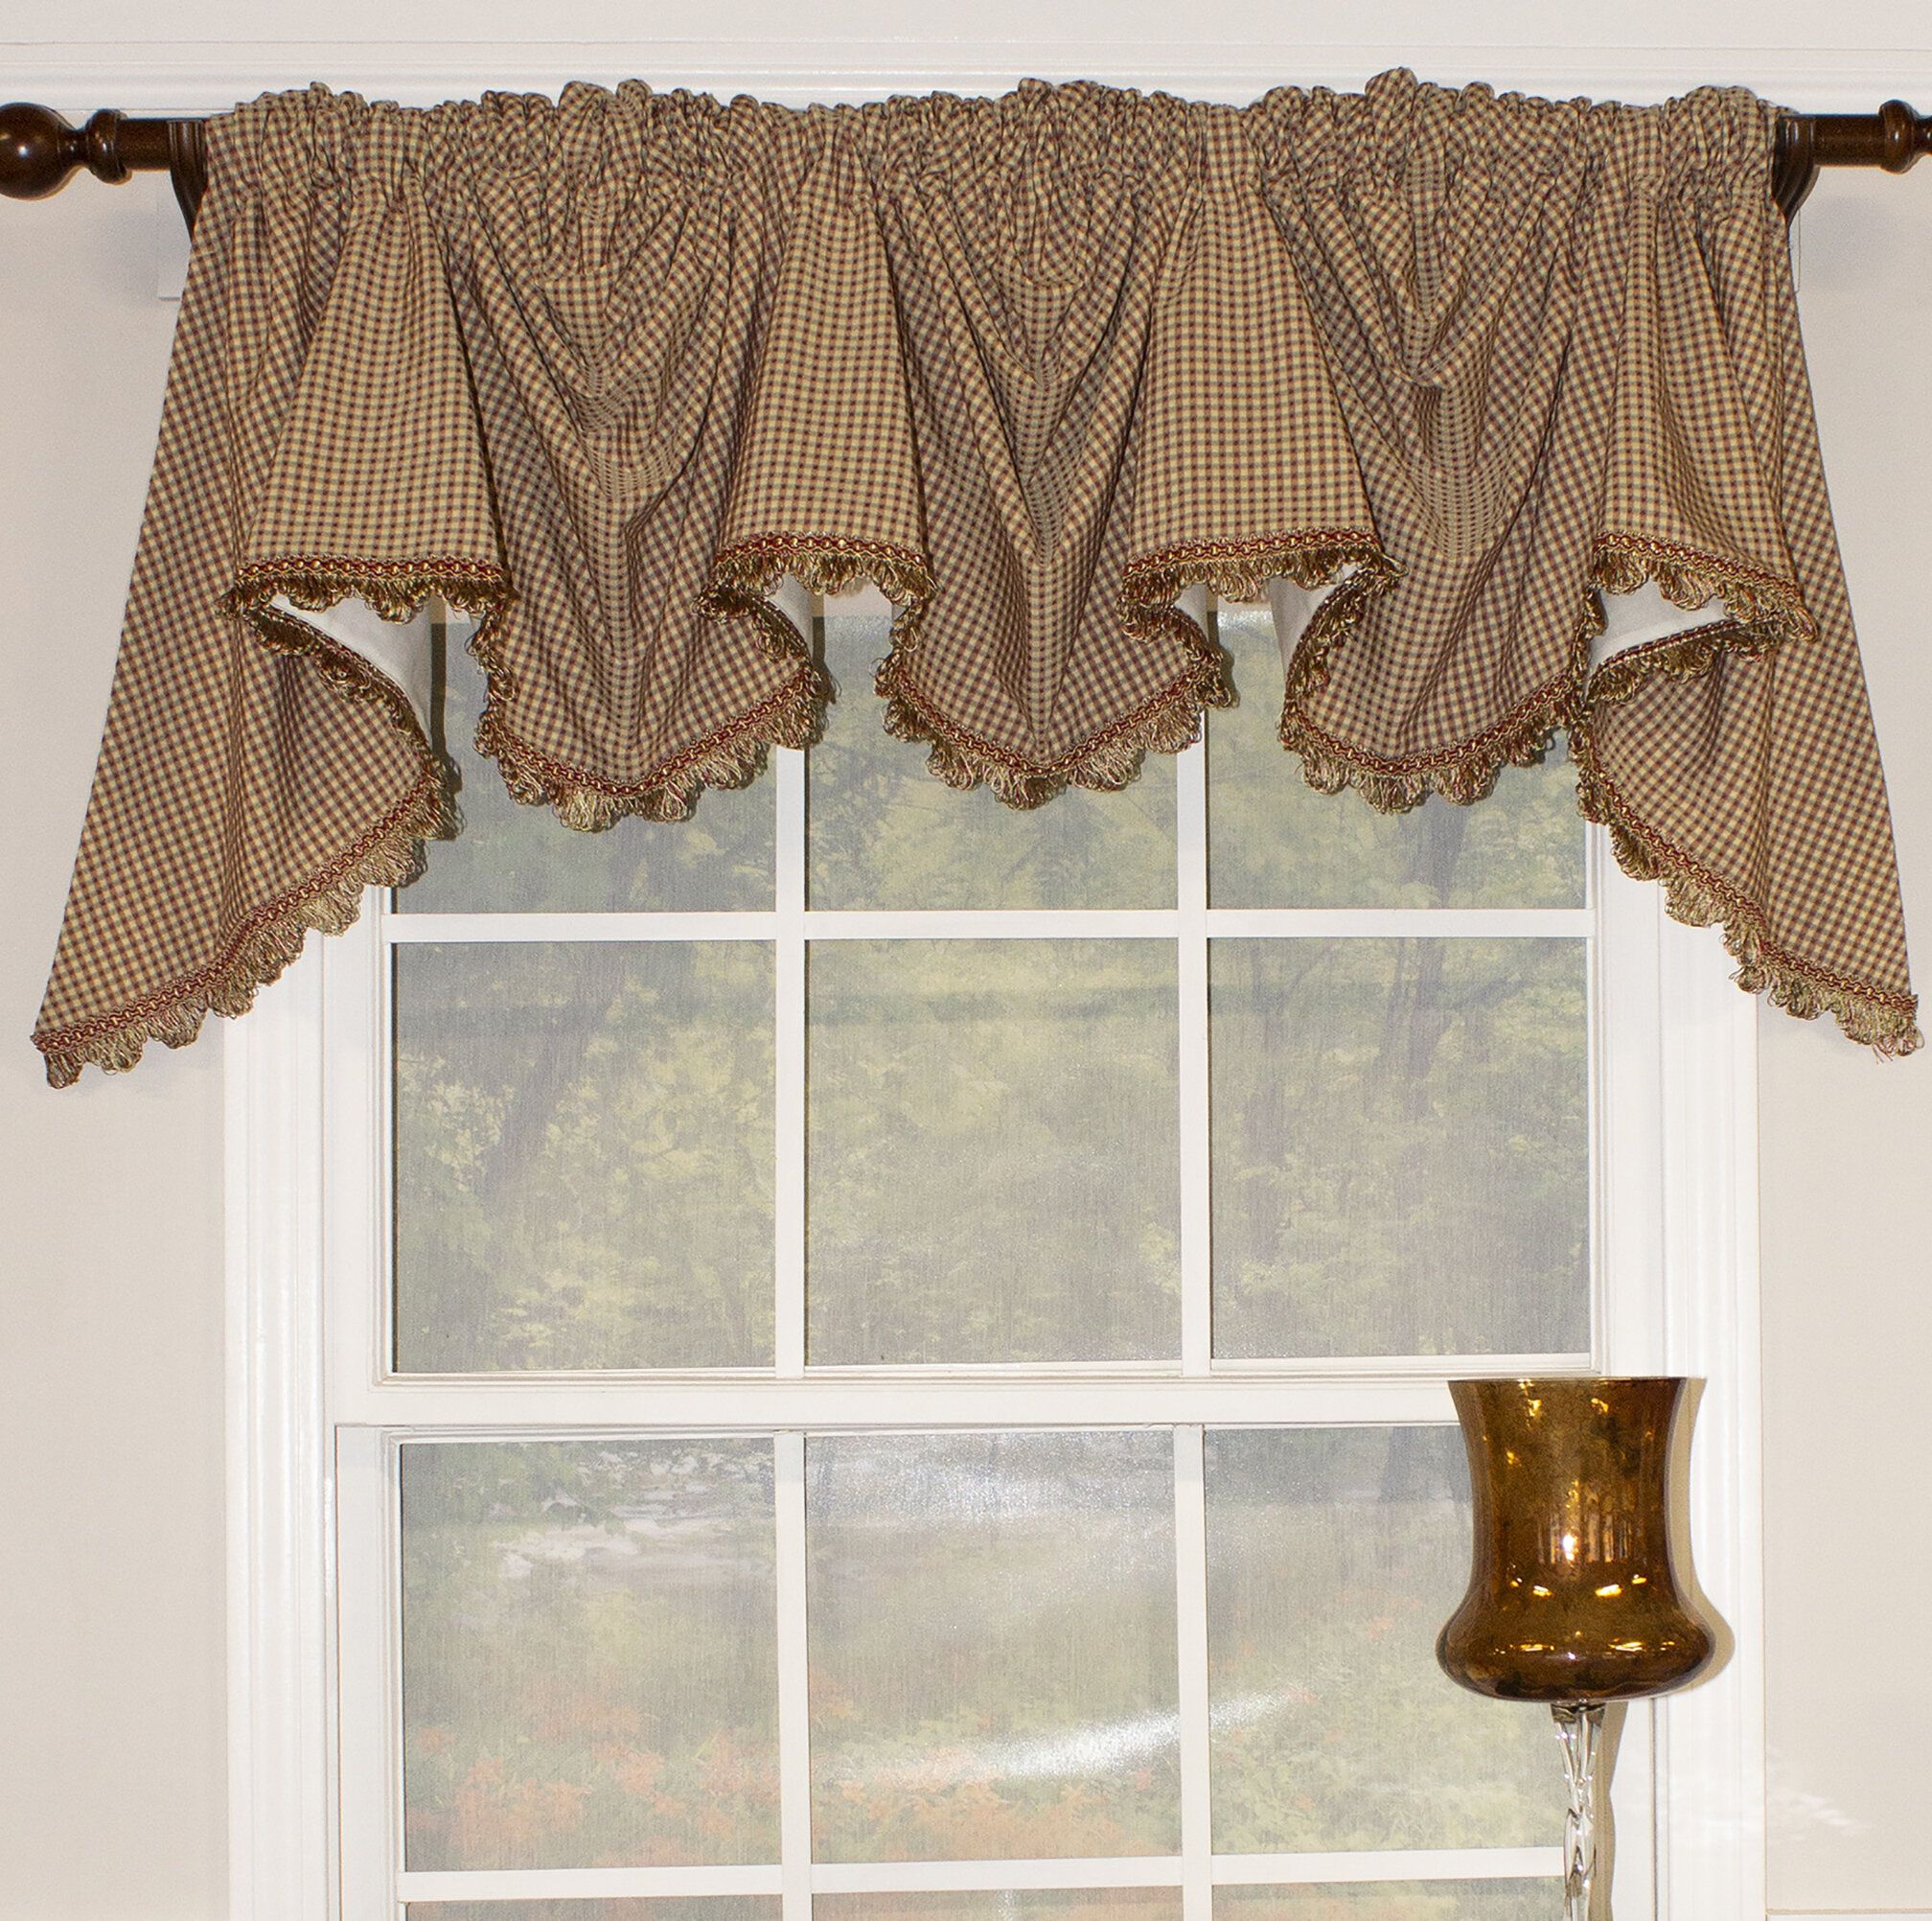 August Grove Lutterworth Window Valance Regarding Imperial Flower Jacquard Tier And Valance Kitchen Curtain Sets (View 19 of 20)